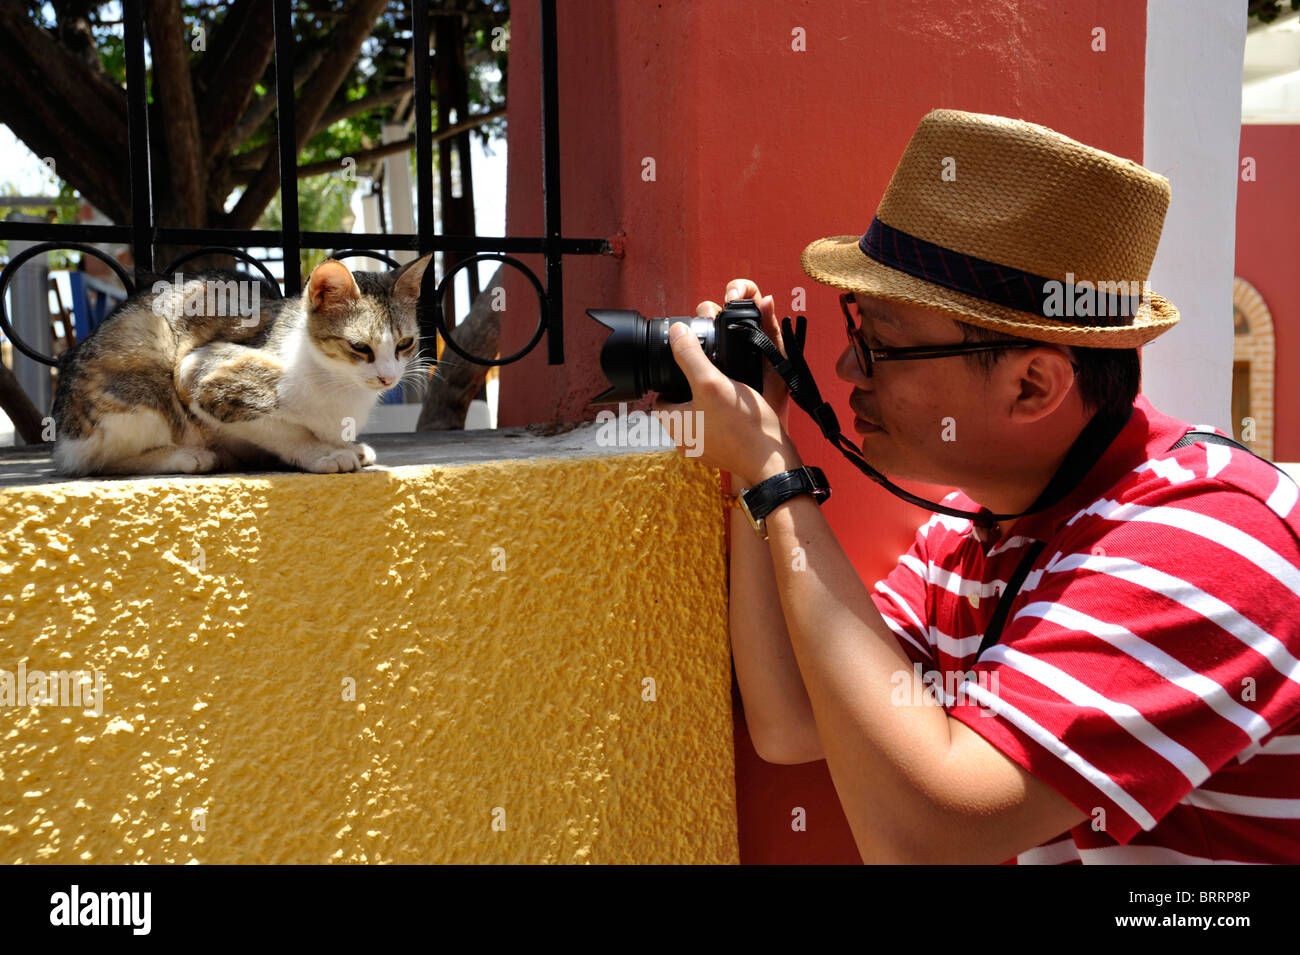 Japanese tourist photographing a cat in the capital town of Fira on the Greek island of Santorini in the Cyclades Stock Photo